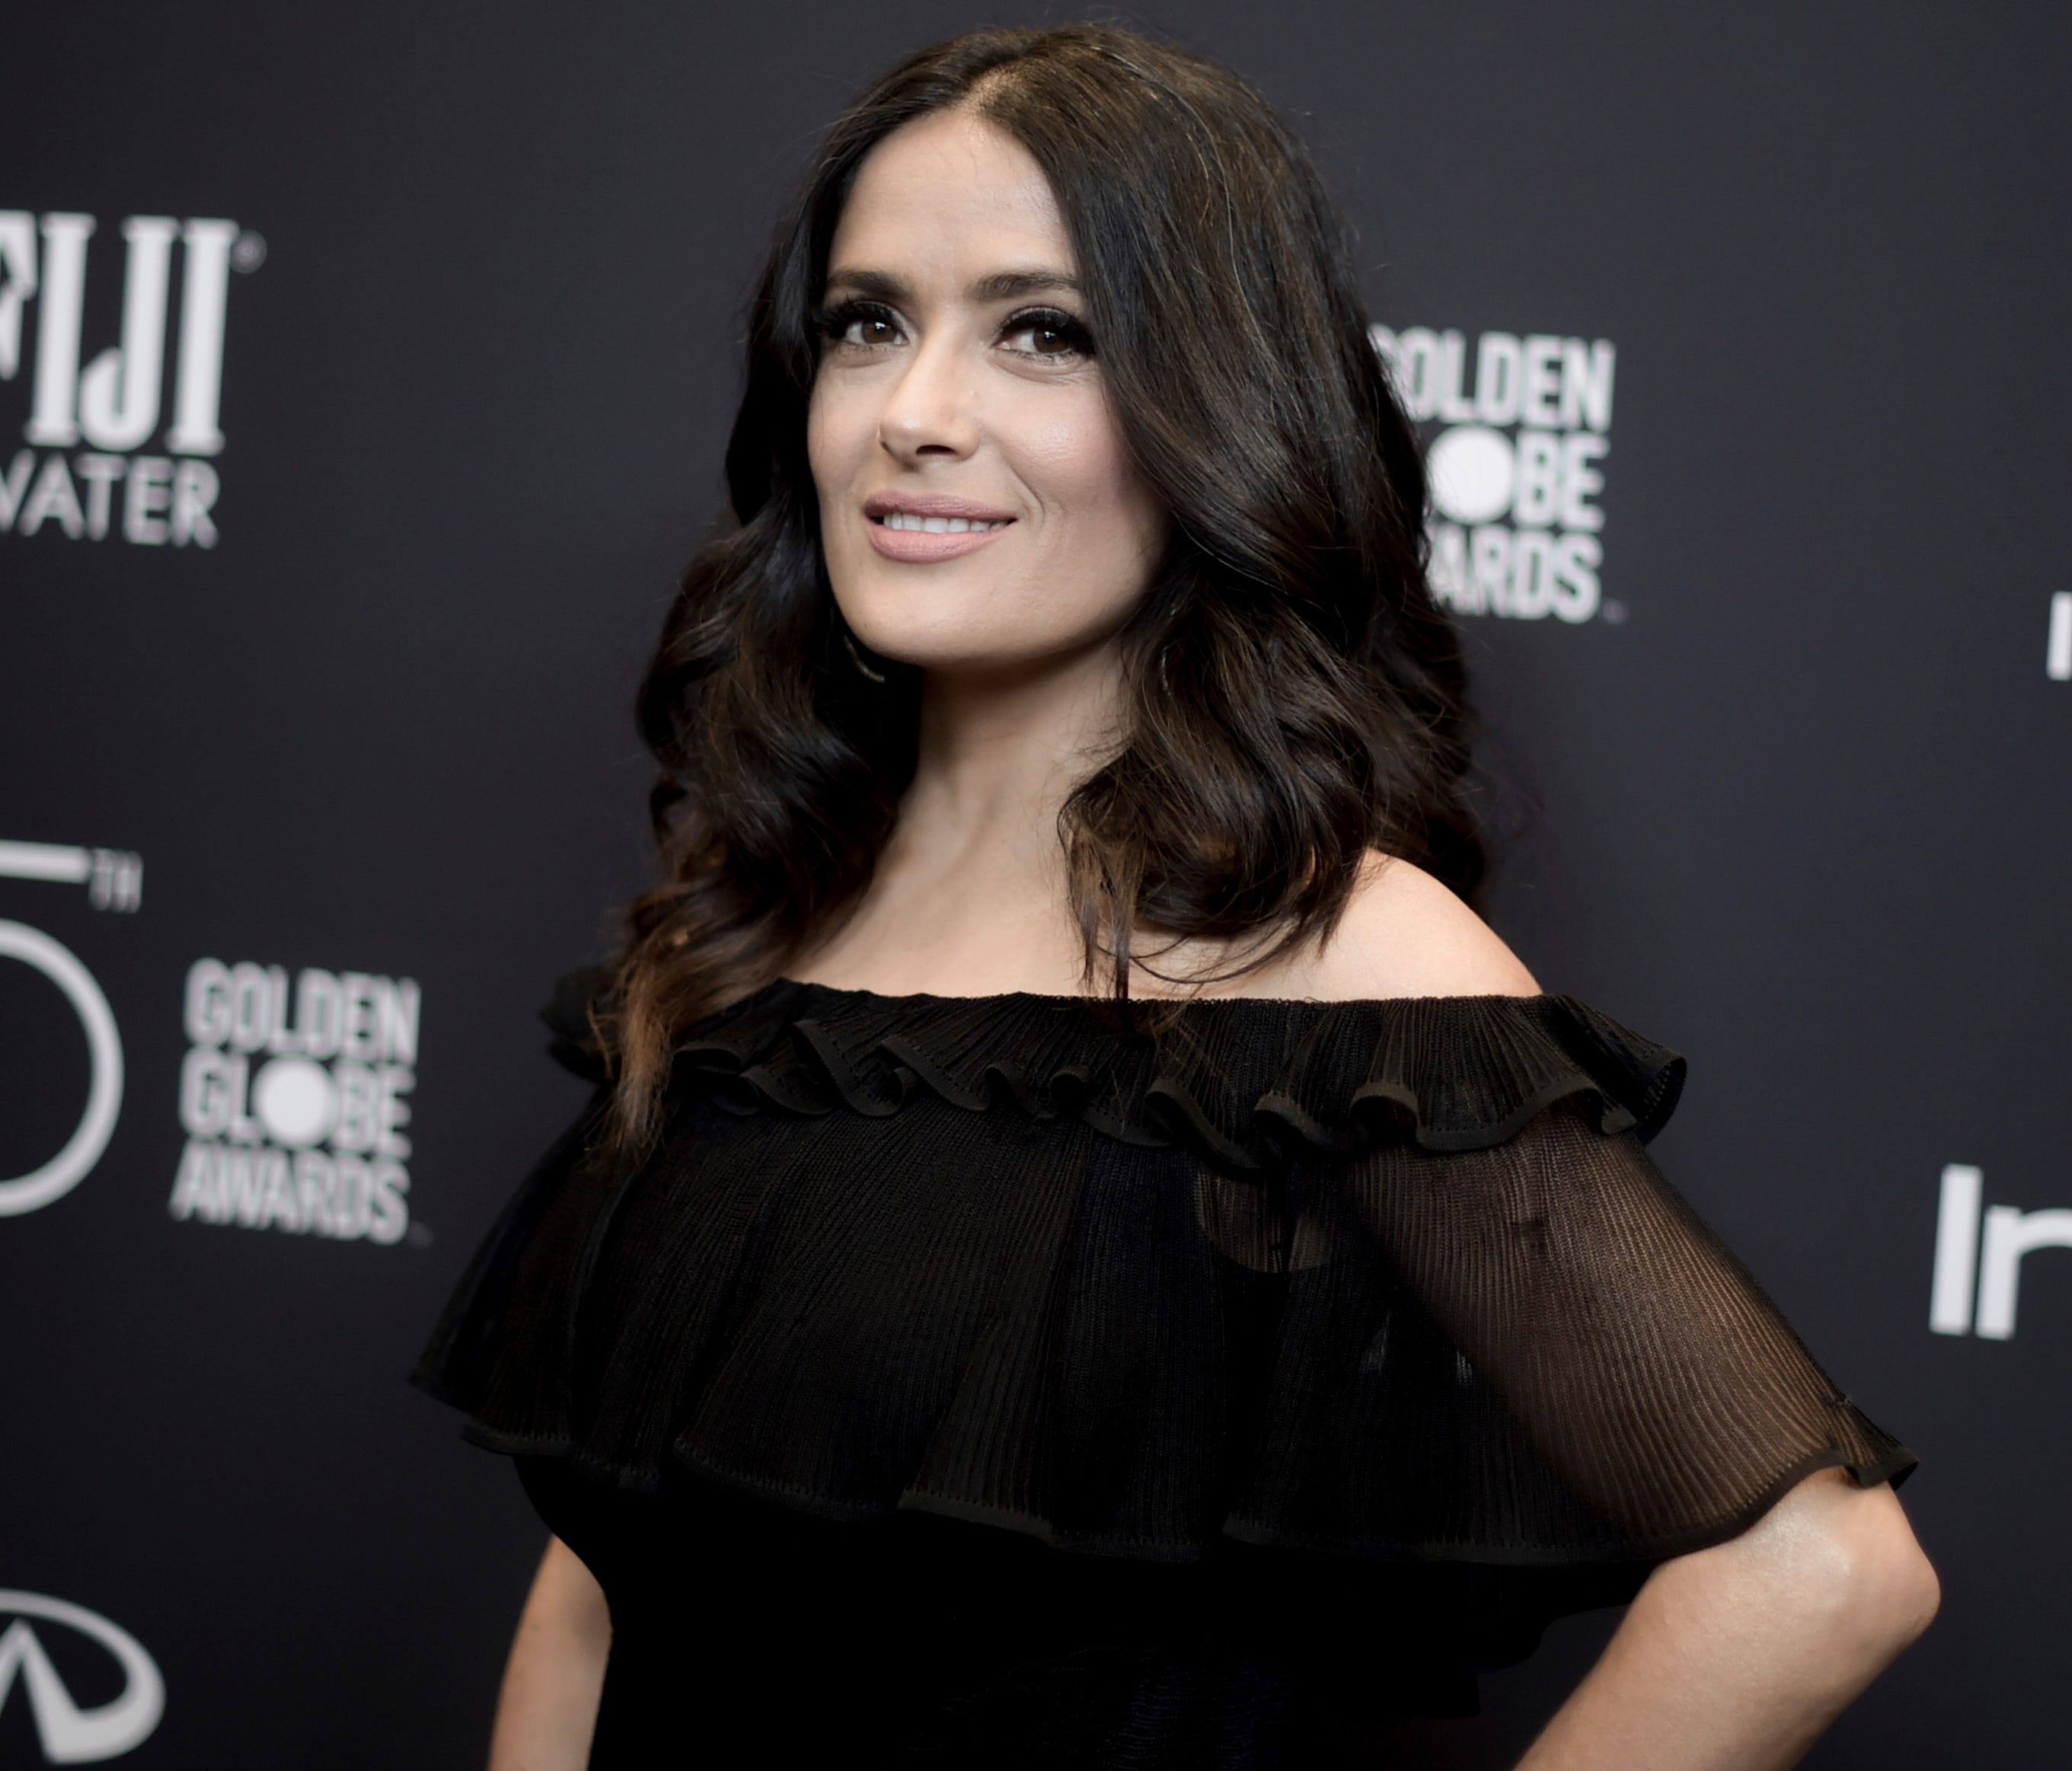 Salma Hayek attends the HFPA and InStyle Celebrate the Golden Globe Awards Season on Nov. 15, 2017, in West Hollywood.